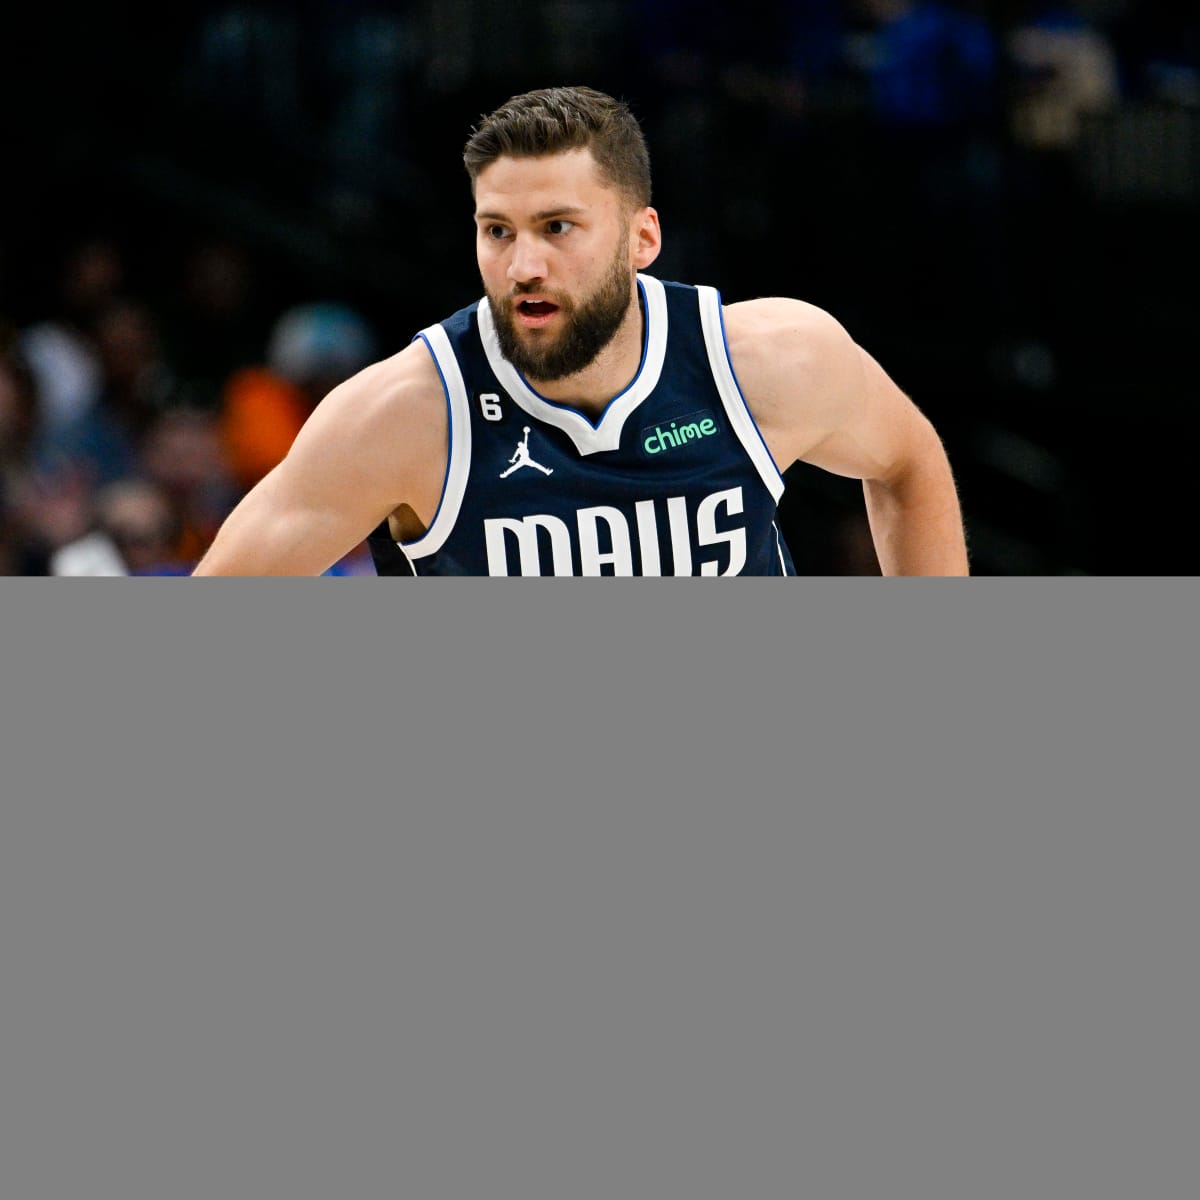 Which Country does Maxi Kleber play for?